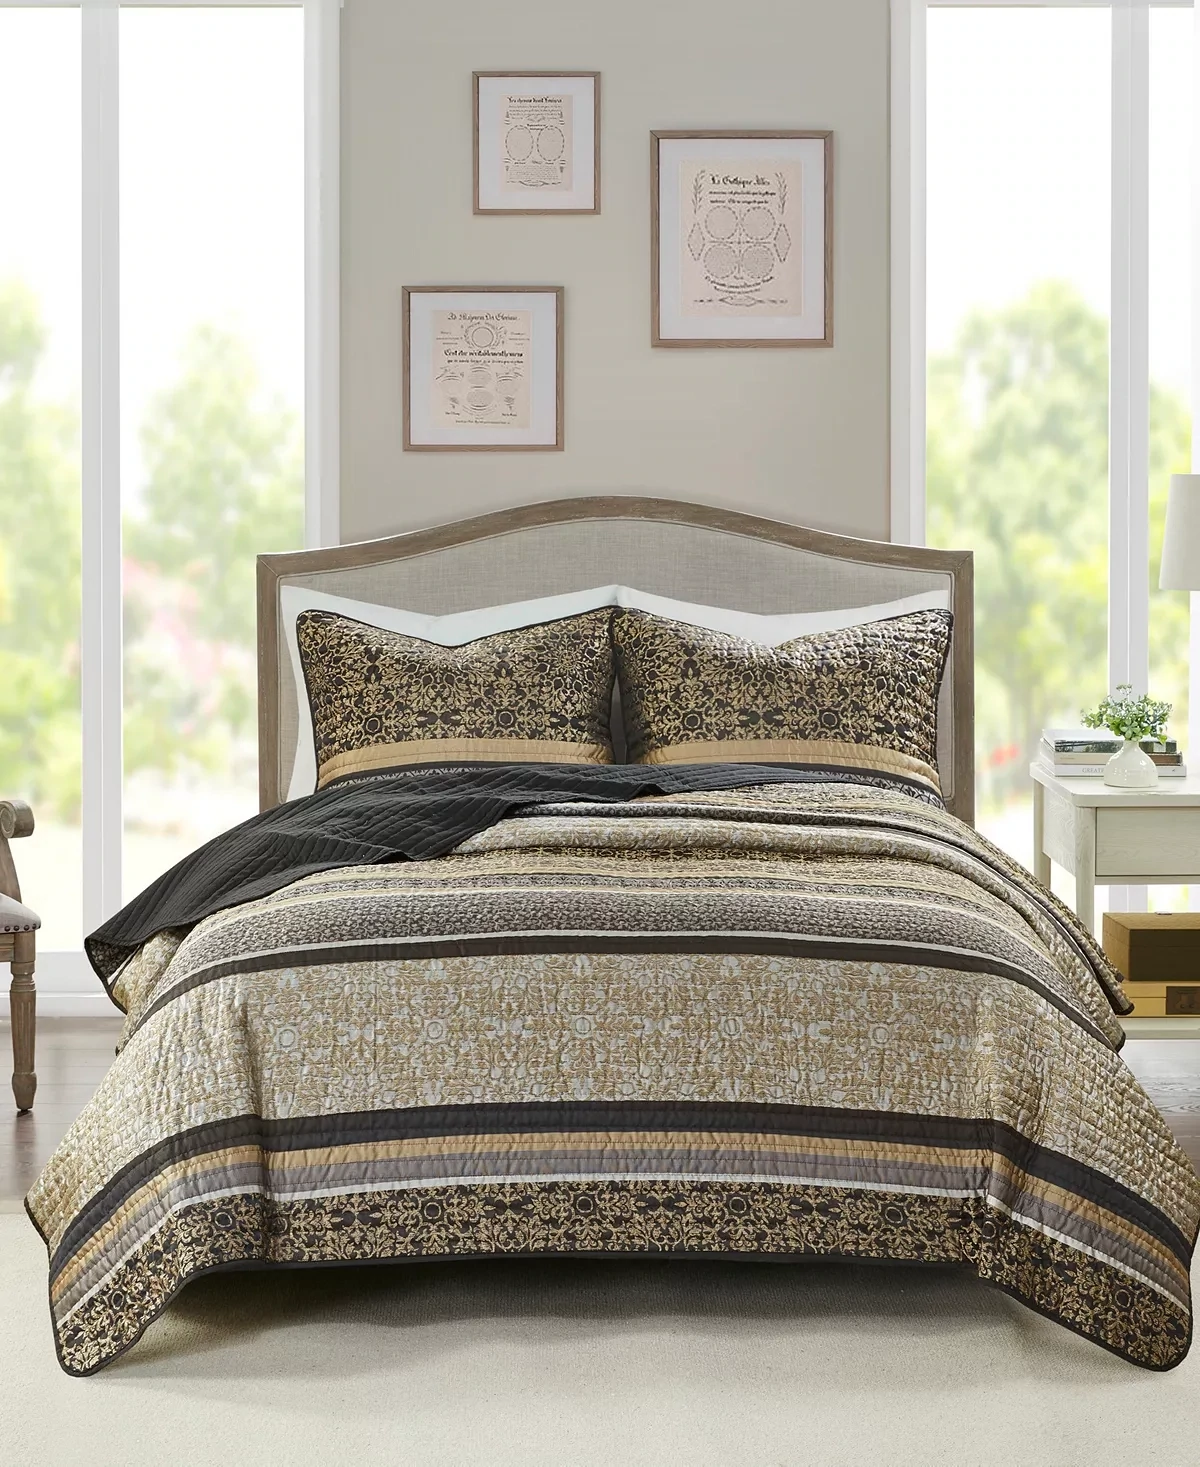 Madison Park Paige Reversible 3-Pc. Quilt Set, Full/Queen - Black and Gold-Tone